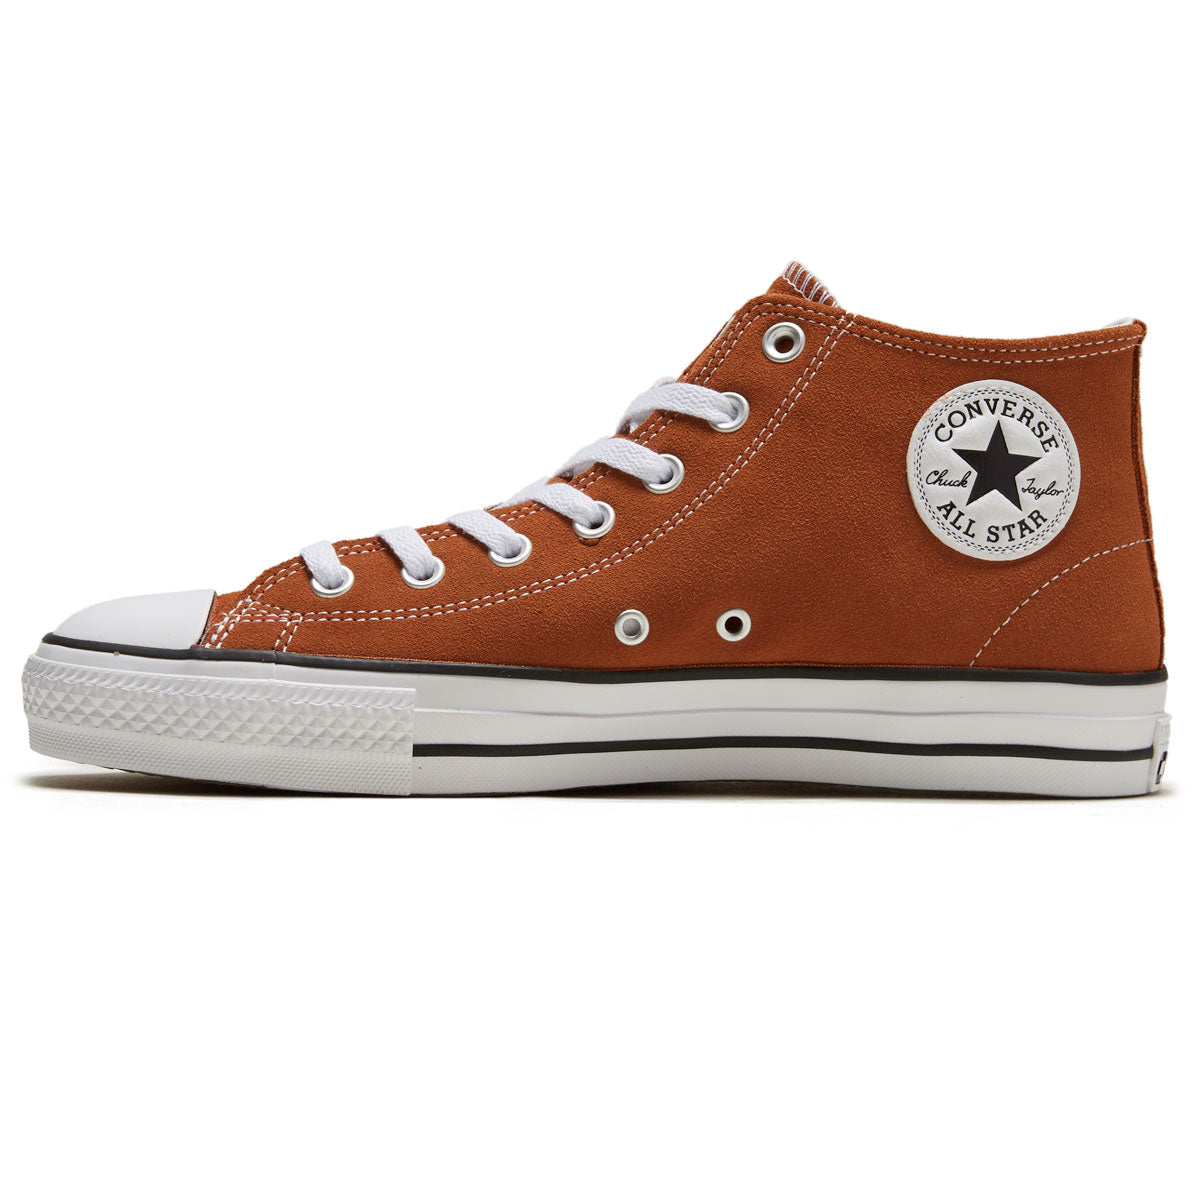 Converse Chuck Taylor All Star Pro Mid Shoes - Tawny Owl/White/Black image 2